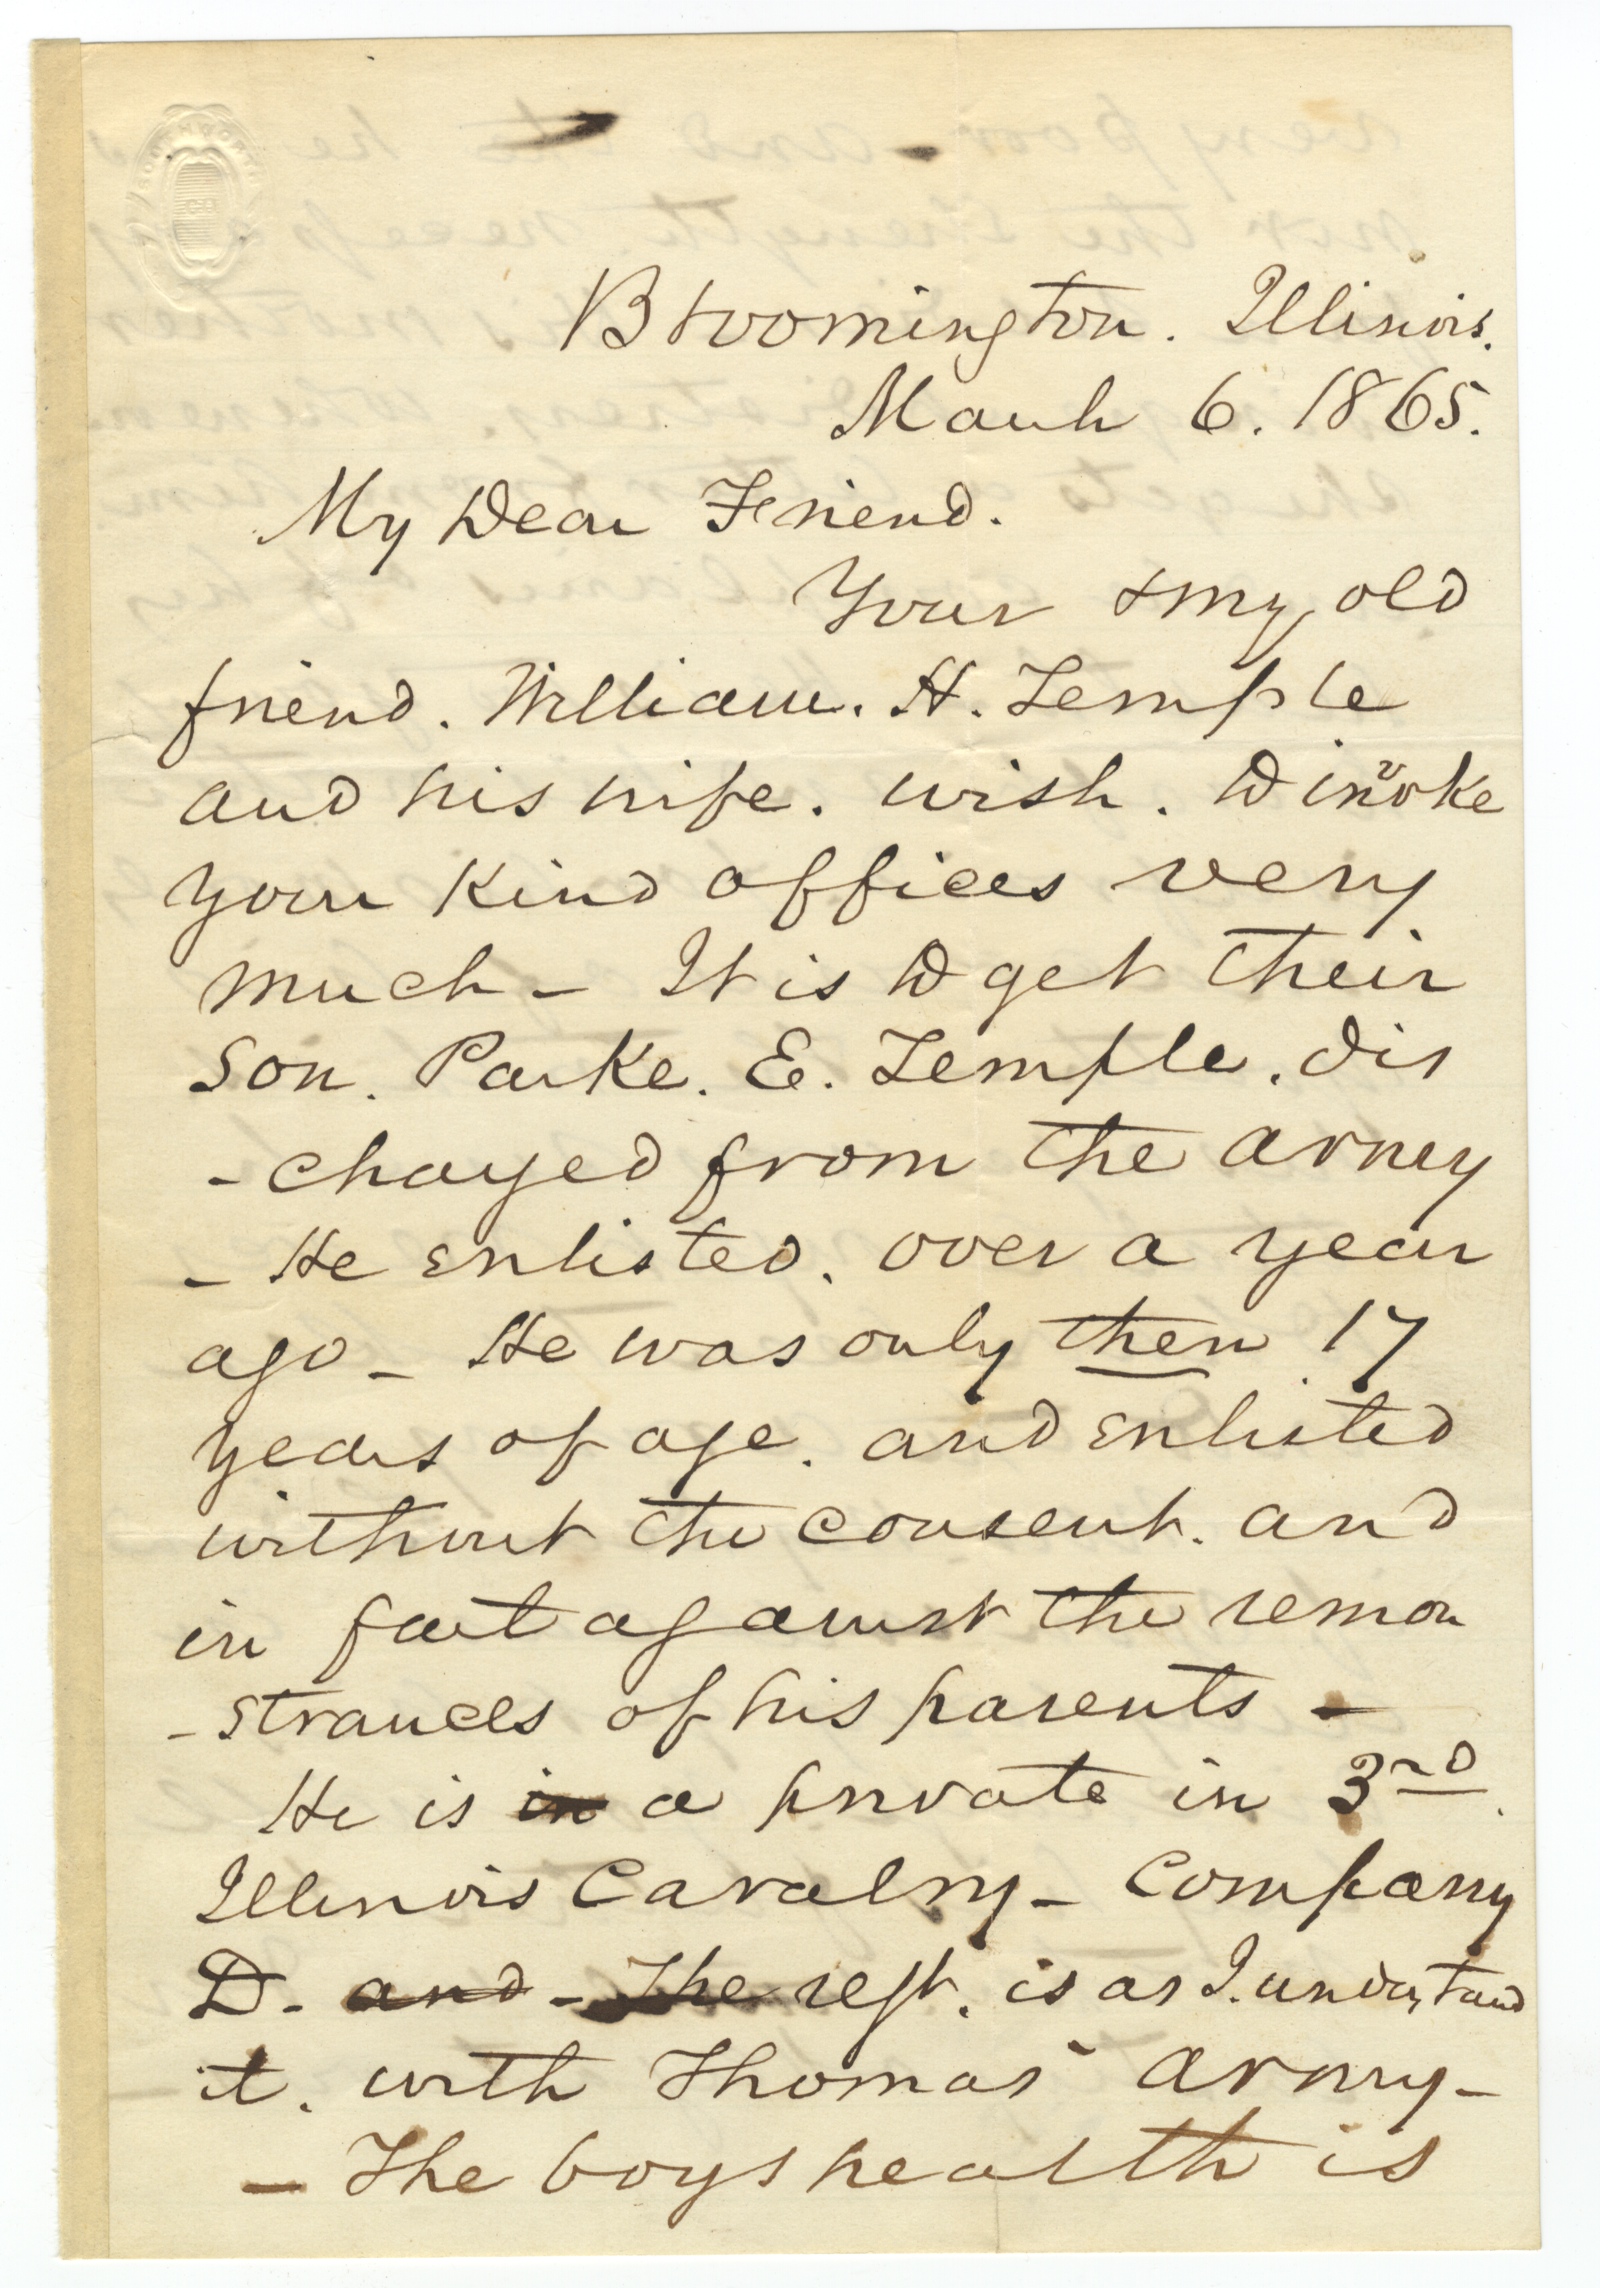 Three Days Before He is Assassinated, Abraham Lincoln Orders the Discharge of a Sickly Boy from the Army